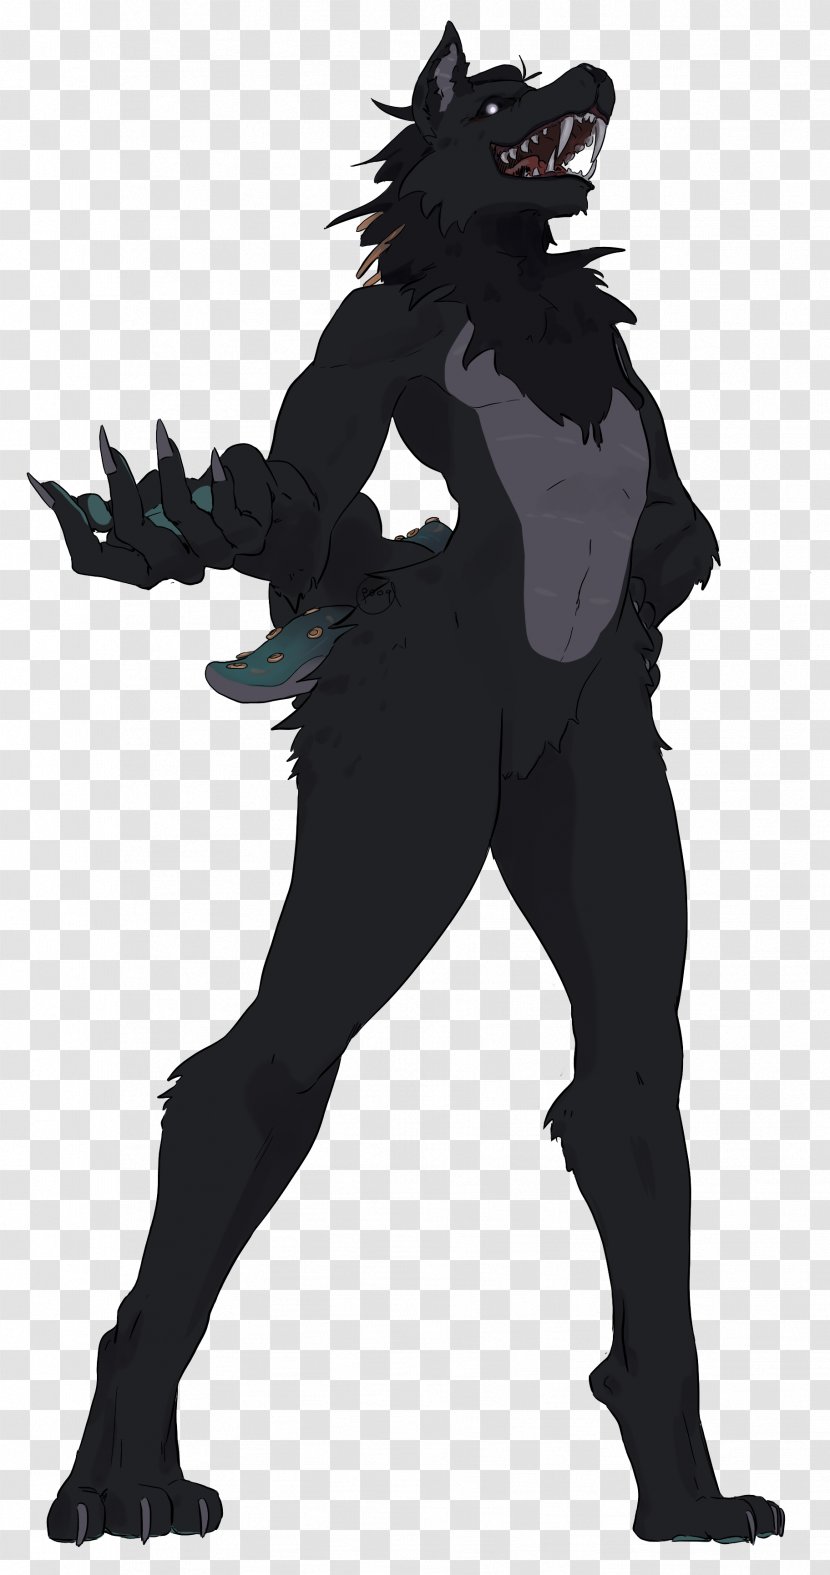 Werewolf Costume - Mythical Creature Transparent PNG